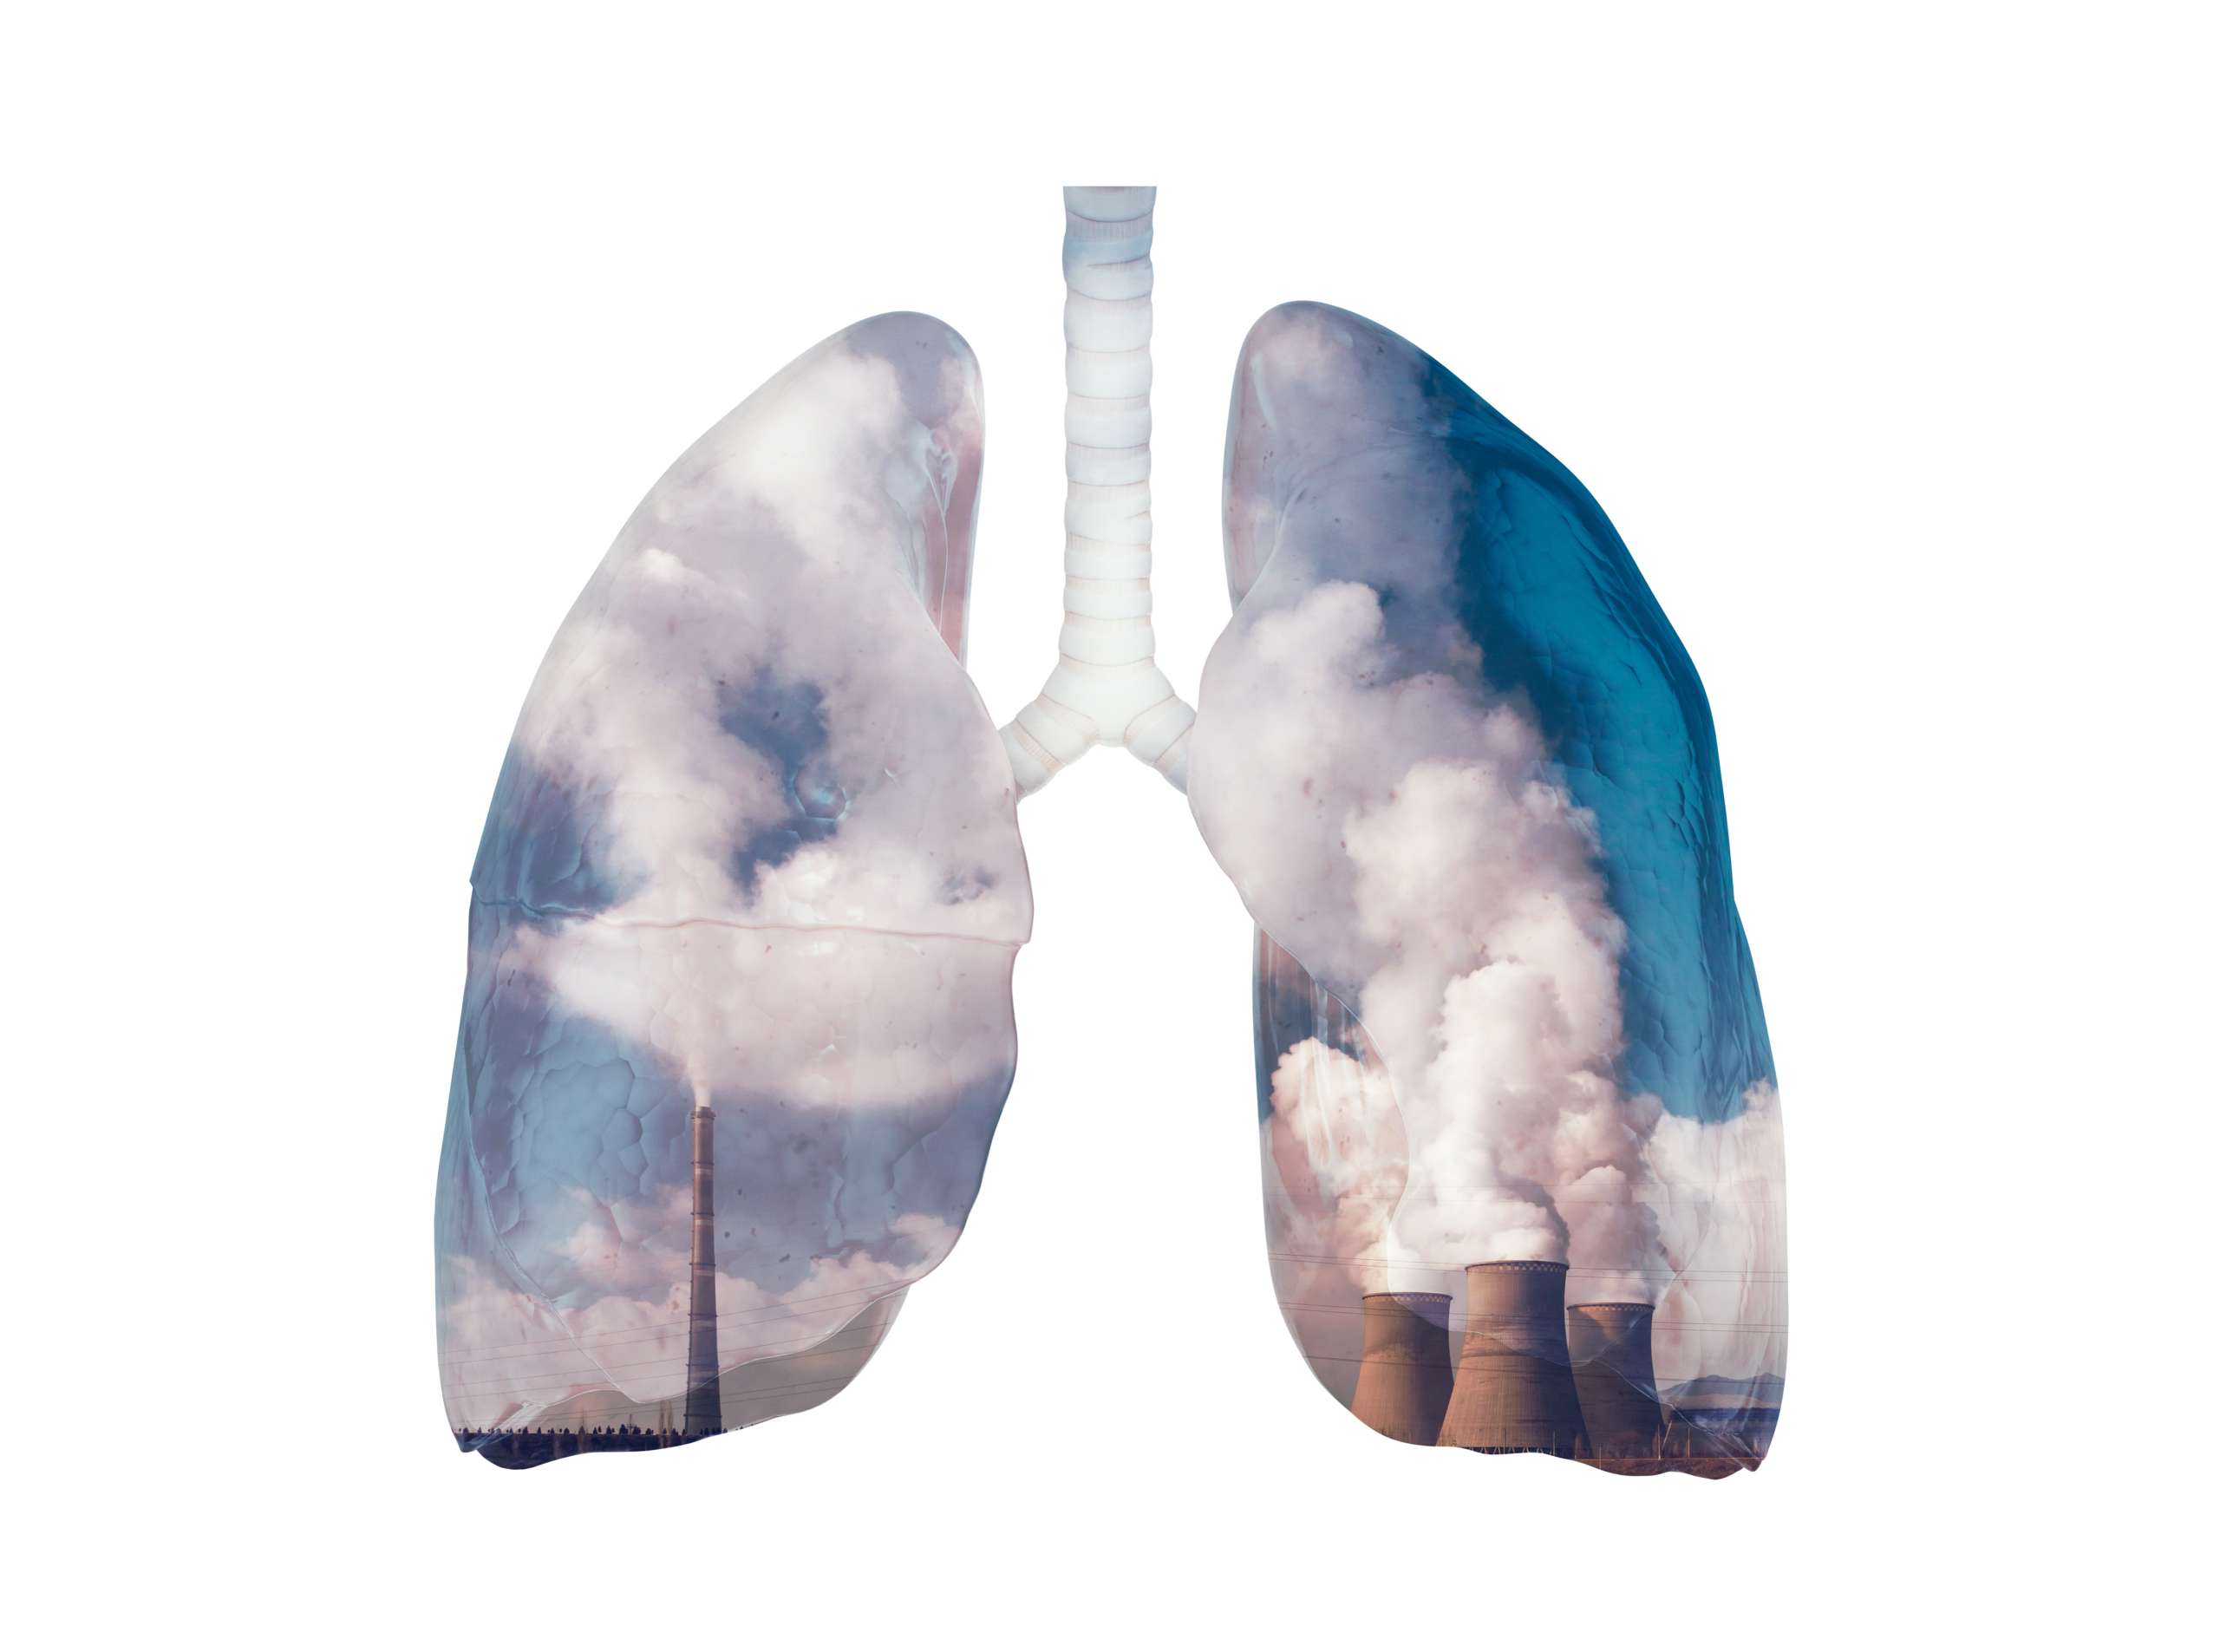 Lungs and environment pollution